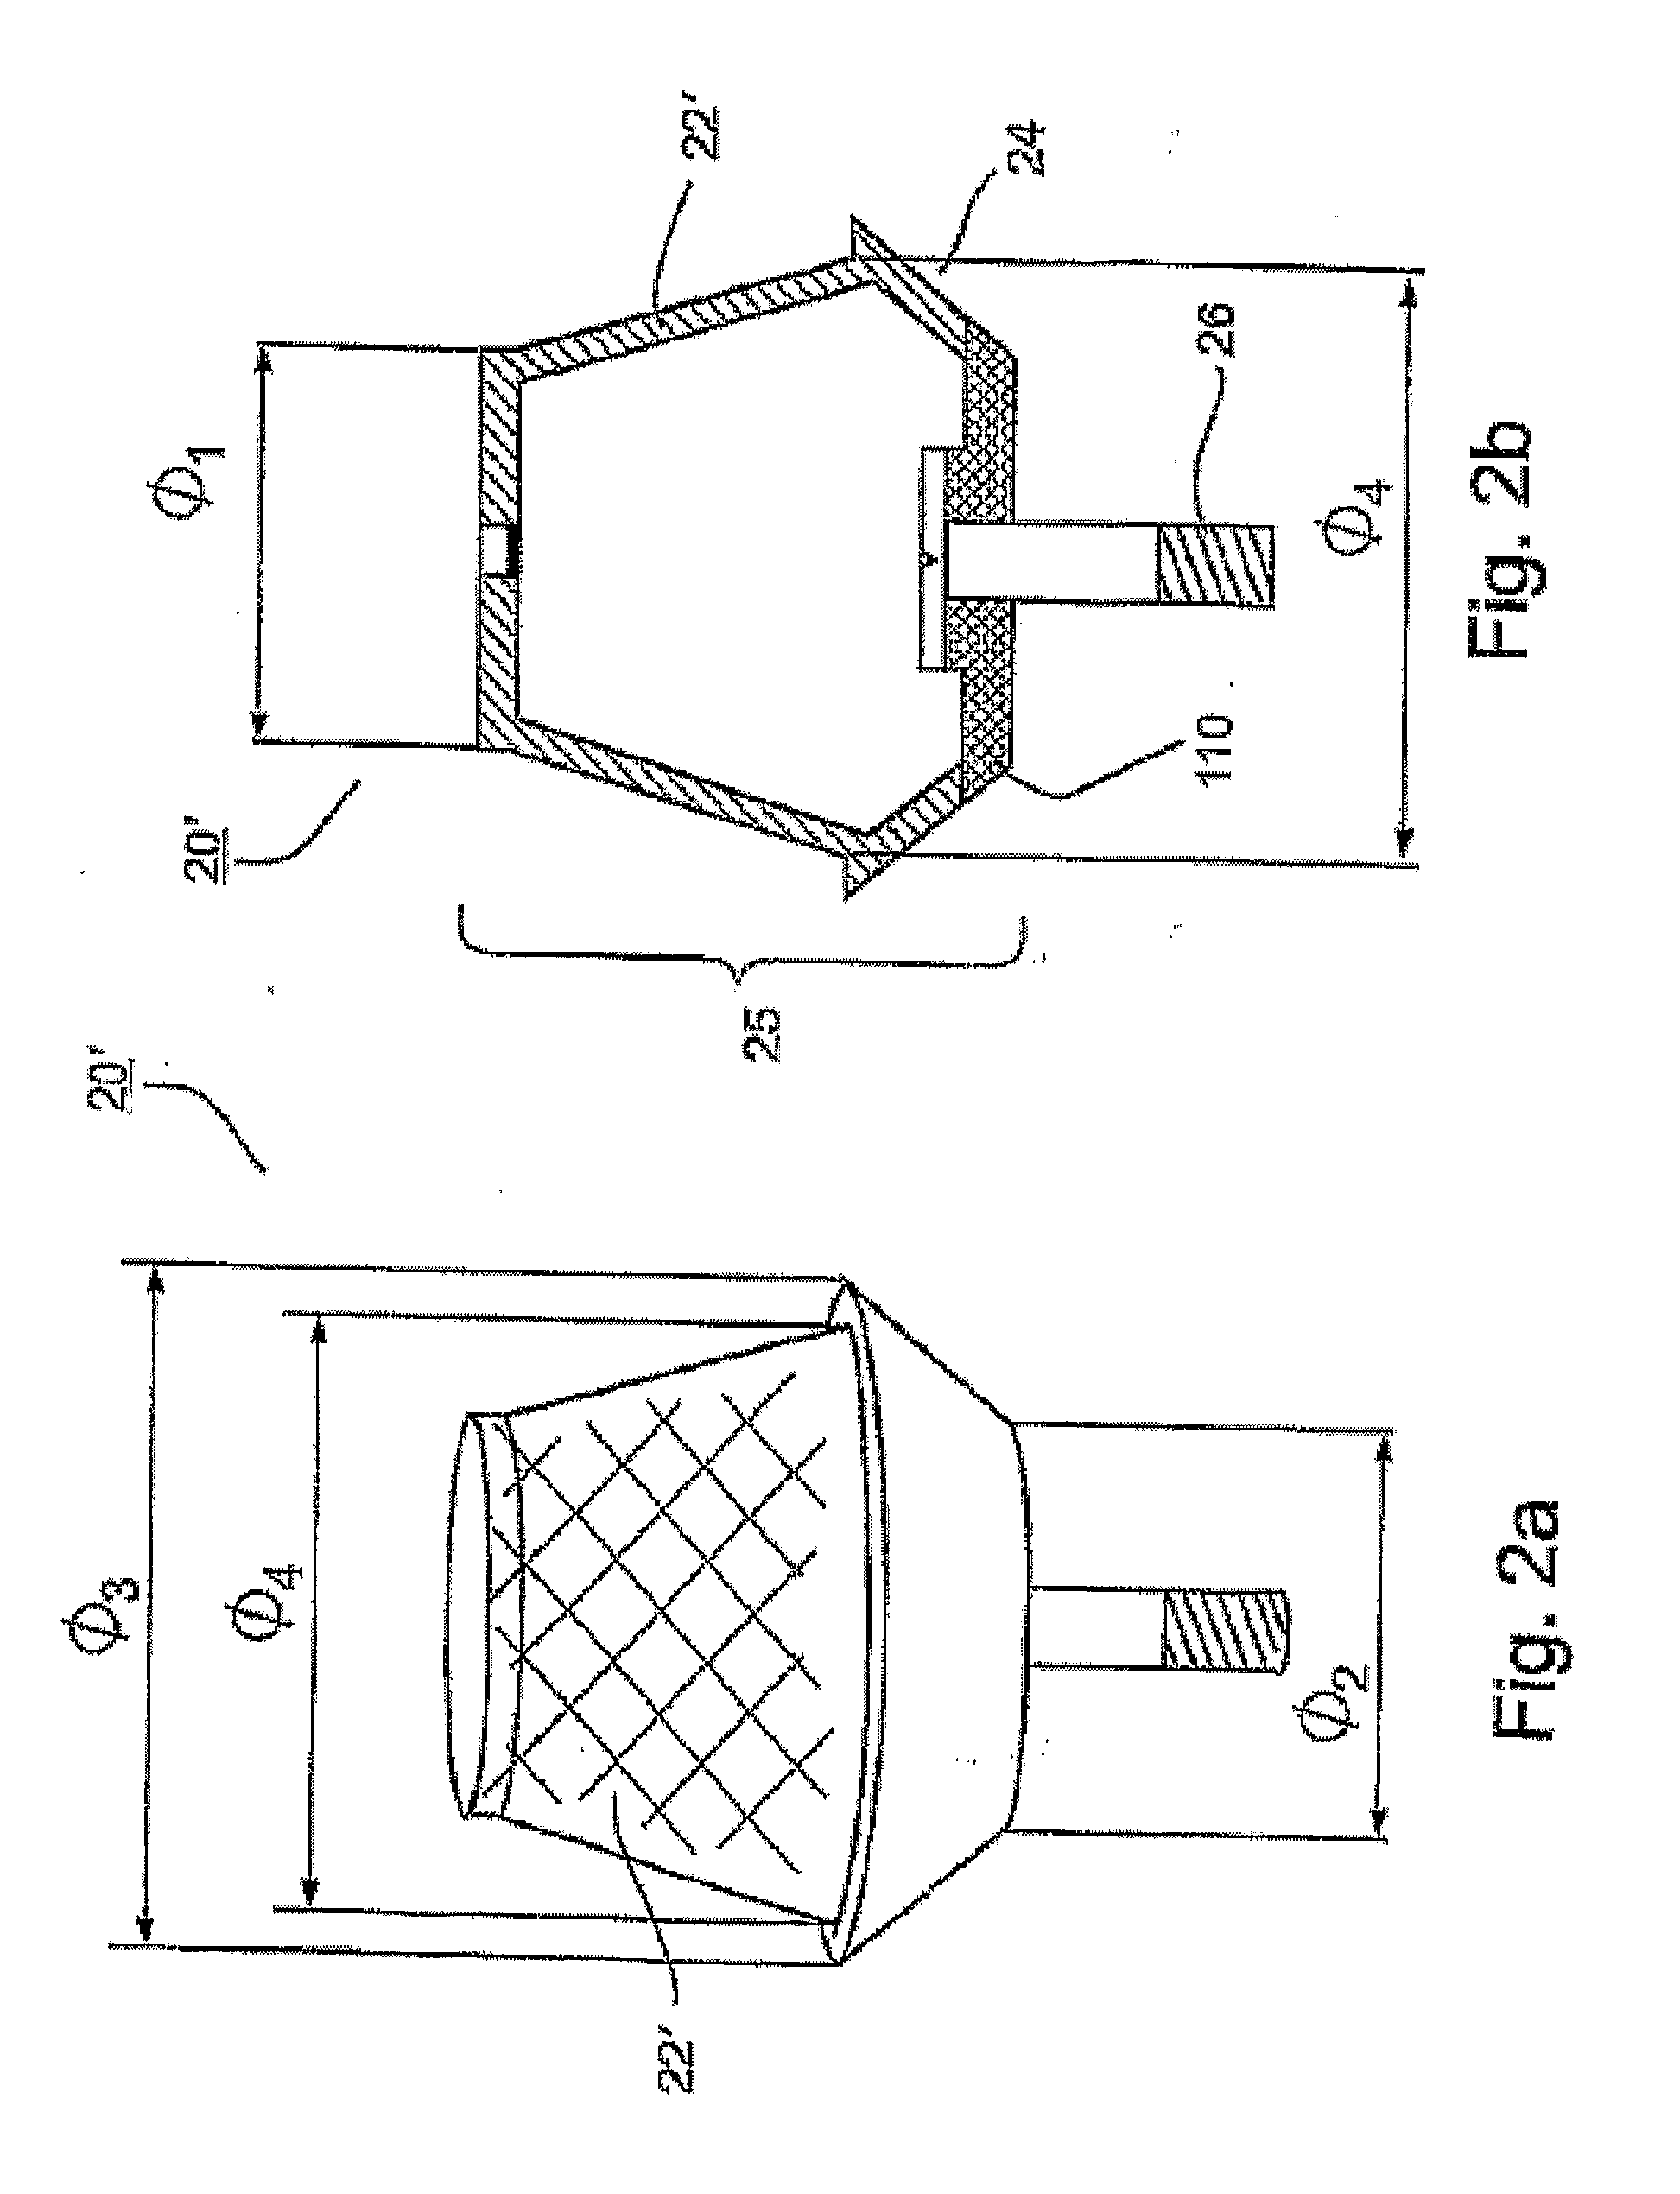 Disposable osteogenesis and osseointegration promotion and maintenance device for endosseous implants